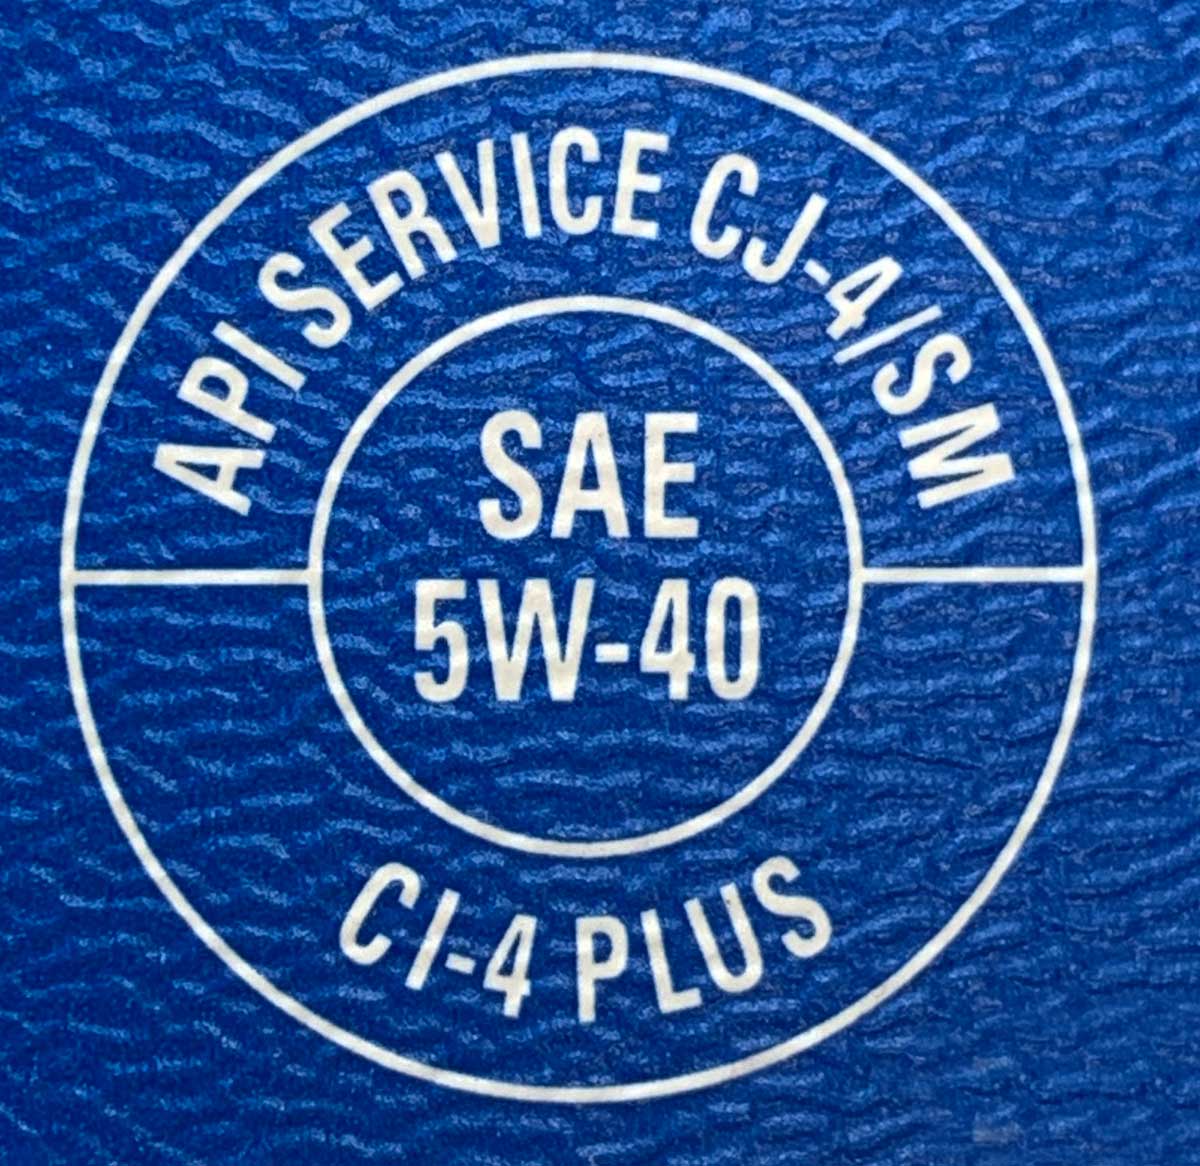 SAE 5W-40 graphic seal